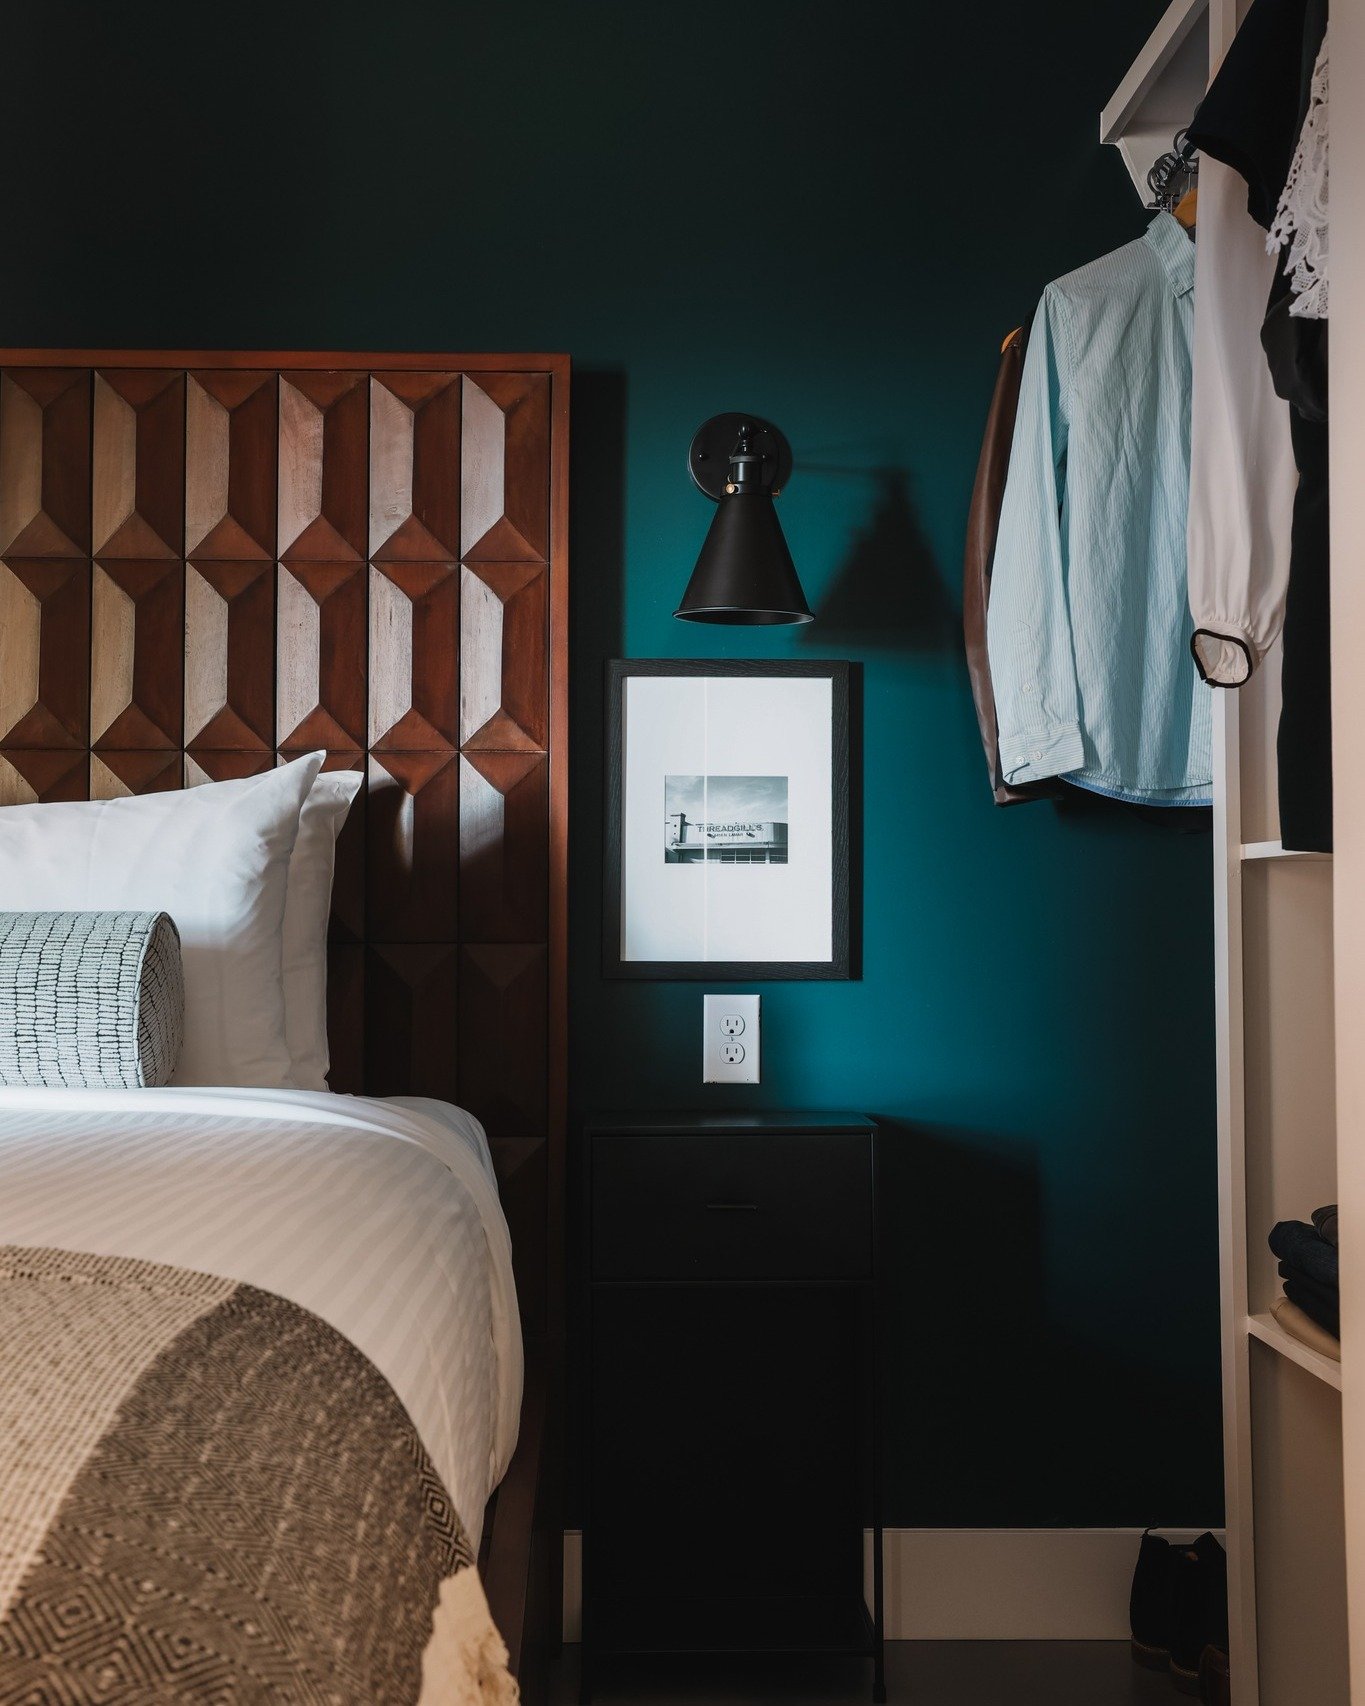 Unpack your luggage, kick off your shoes, and start turning moments into memories ✨

Choose Colton House as your home away from home and book your stay today at the link🔗 in our bio 

#unpack #stayawhile #hotelstays #longtermstays #extendedstay #ext